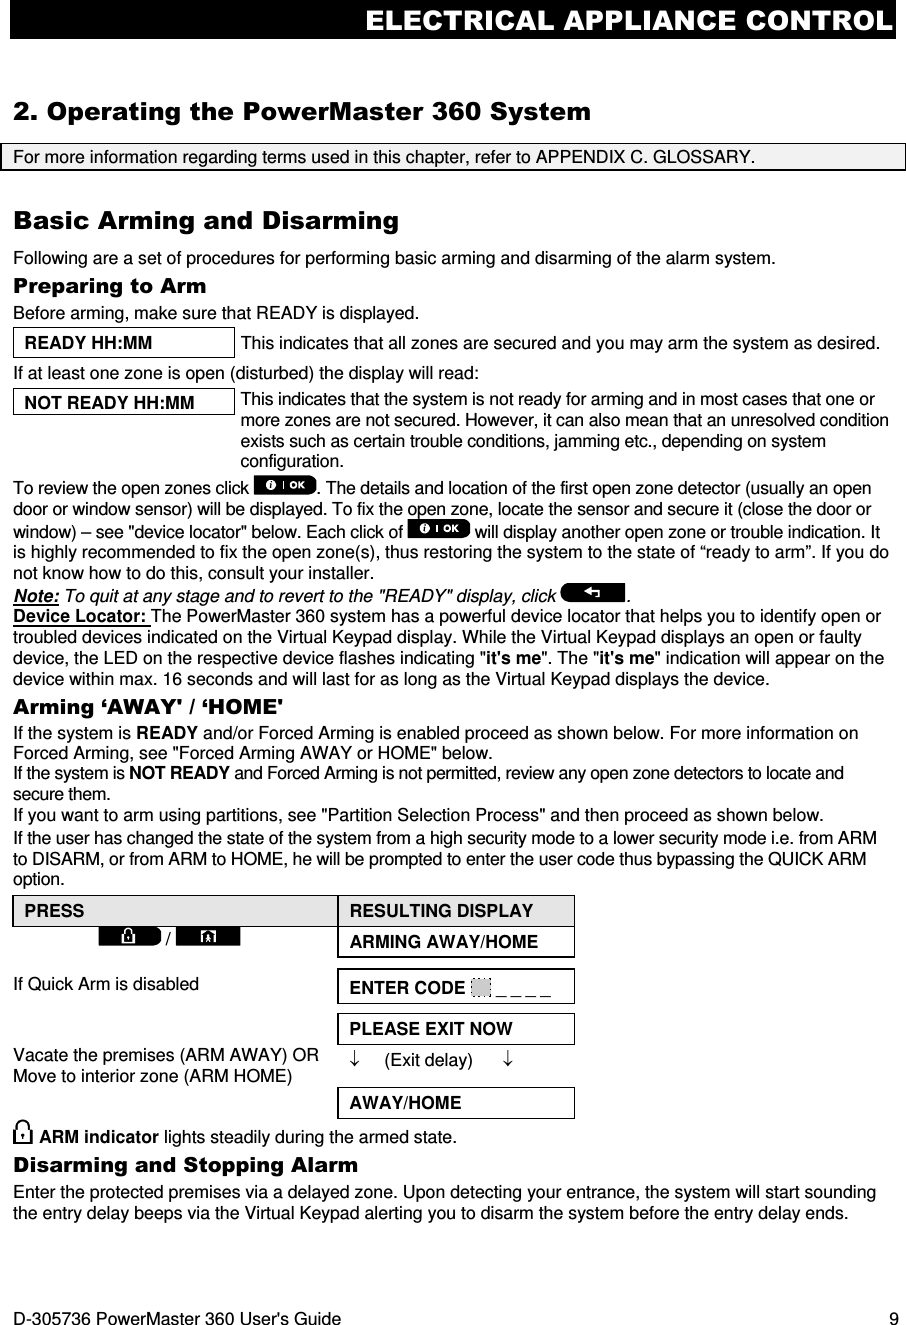 ELECTRICAL APPLIANCE CONTROL D-305736 PowerMaster 360 User&apos;s Guide  9 2. Operating the PowerMaster 360 System For more information regarding terms used in this chapter, refer to APPENDIX C. GLOSSARY. Basic Arming and Disarming Following are a set of procedures for performing basic arming and disarming of the alarm system. Preparing to Arm Before arming, make sure that READY is displayed. READY HH:MM  This indicates that all zones are secured and you may arm the system as desired. If at least one zone is open (disturbed) the display will read:  NOT READY HH:MM  This indicates that the system is not ready for arming and in most cases that one or more zones are not secured. However, it can also mean that an unresolved condition exists such as certain trouble conditions, jamming etc., depending on system configuration.  To review the open zones click  . The details and location of the first open zone detector (usually an open door or window sensor) will be displayed. To fix the open zone, locate the sensor and secure it (close the door or window) – see &quot;device locator&quot; below. Each click of   will display another open zone or trouble indication. It is highly recommended to fix the open zone(s), thus restoring the system to the state of “ready to arm”. If you do not know how to do this, consult your installer. Note: To quit at any stage and to revert to the &quot;READY&quot; display, click  . Device Locator: The PowerMaster 360 system has a powerful device locator that helps you to identify open or troubled devices indicated on the Virtual Keypad display. While the Virtual Keypad displays an open or faulty device, the LED on the respective device flashes indicating &quot;it&apos;s me&quot;. The &quot;it&apos;s me&quot; indication will appear on the device within max. 16 seconds and will last for as long as the Virtual Keypad displays the device. Arming ‘AWAY&apos; / ‘HOME&apos; If the system is READY and/or Forced Arming is enabled proceed as shown below. For more information on Forced Arming, see &quot;Forced Arming AWAY or HOME&quot; below. If the system is NOT READY and Forced Arming is not permitted, review any open zone detectors to locate and secure them. If you want to arm using partitions, see &quot;Partition Selection Process&quot; and then proceed as shown below. If the user has changed the state of the system from a high security mode to a lower security mode i.e. from ARM to DISARM, or from ARM to HOME, he will be prompted to enter the user code thus bypassing the QUICK ARM option. PRESS  RESULTING DISPLAY  /    ARMING AWAY/HOME   If Quick Arm is disabled  ENTER CODE   _ _ _ _    PLEASE EXIT NOW Vacate the premises (ARM AWAY) OR Move to interior zone (ARM HOME) ↓     (Exit delay)      ↓  AWAY/HOME  ARM indicator lights steadily during the armed state. Disarming and Stopping Alarm Enter the protected premises via a delayed zone. Upon detecting your entrance, the system will start sounding the entry delay beeps via the Virtual Keypad alerting you to disarm the system before the entry delay ends. 